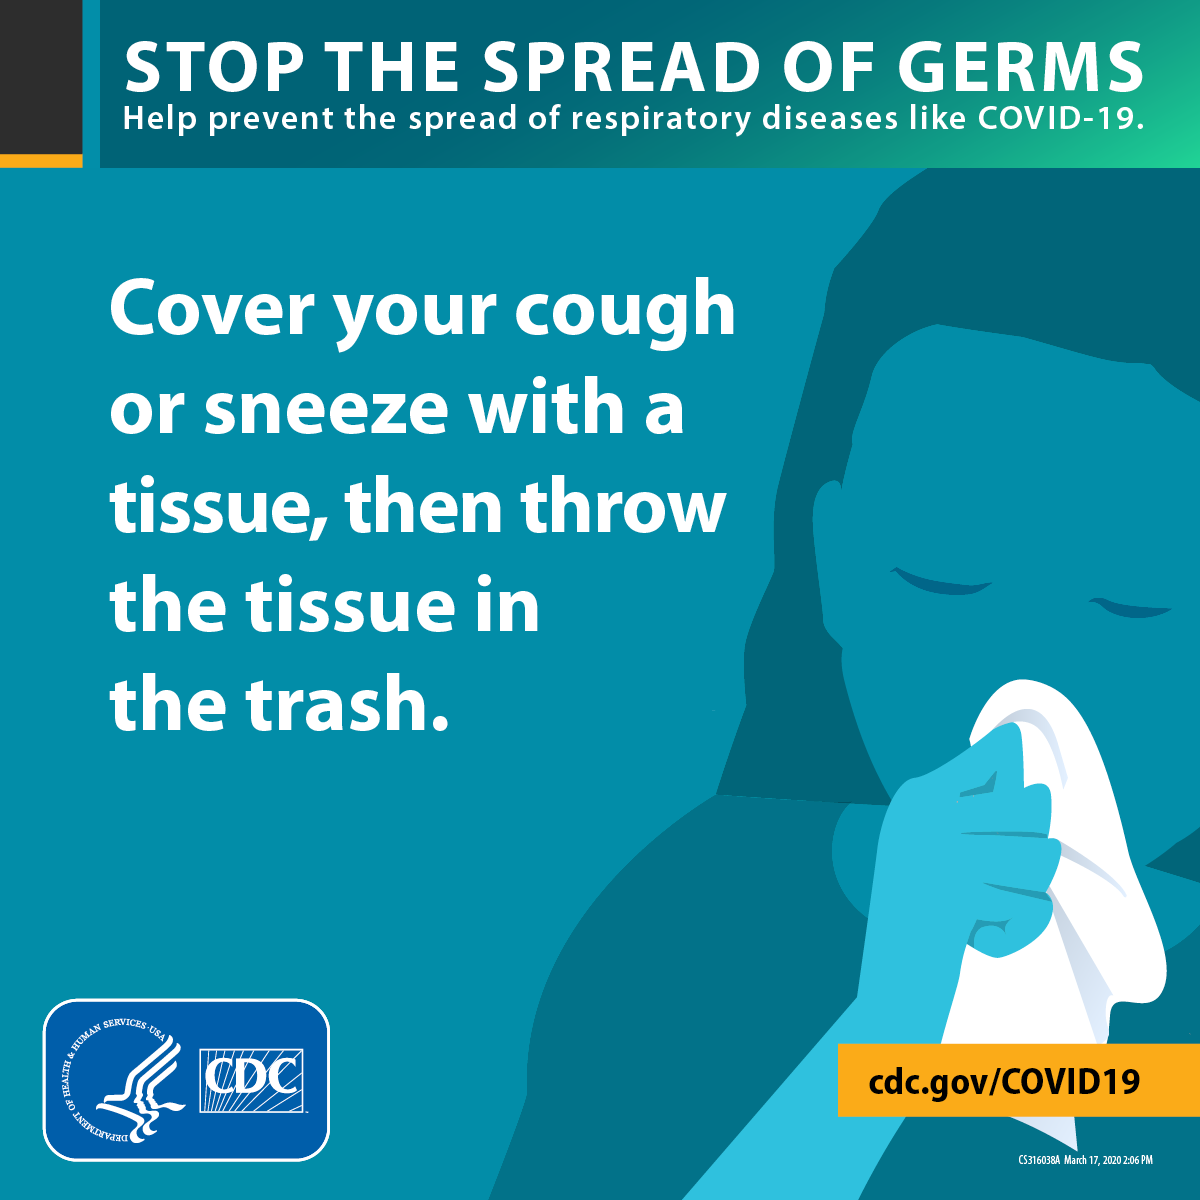 COVID-19_StopSpread_Cough_ENG_1200x1200.png